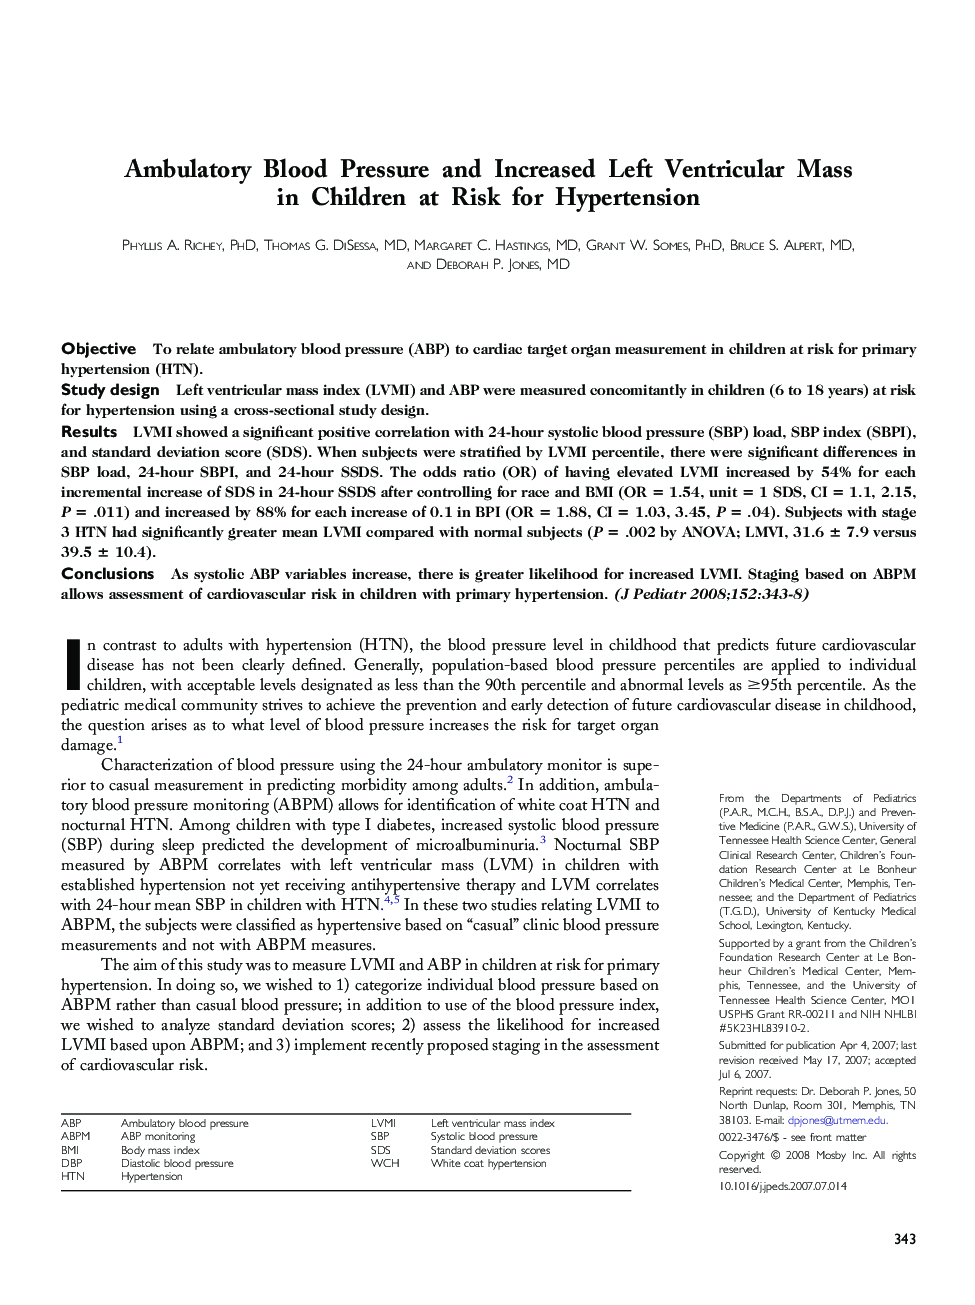 Ambulatory Blood Pressure and Increased Left Ventricular Mass in Children at Risk for Hypertension 